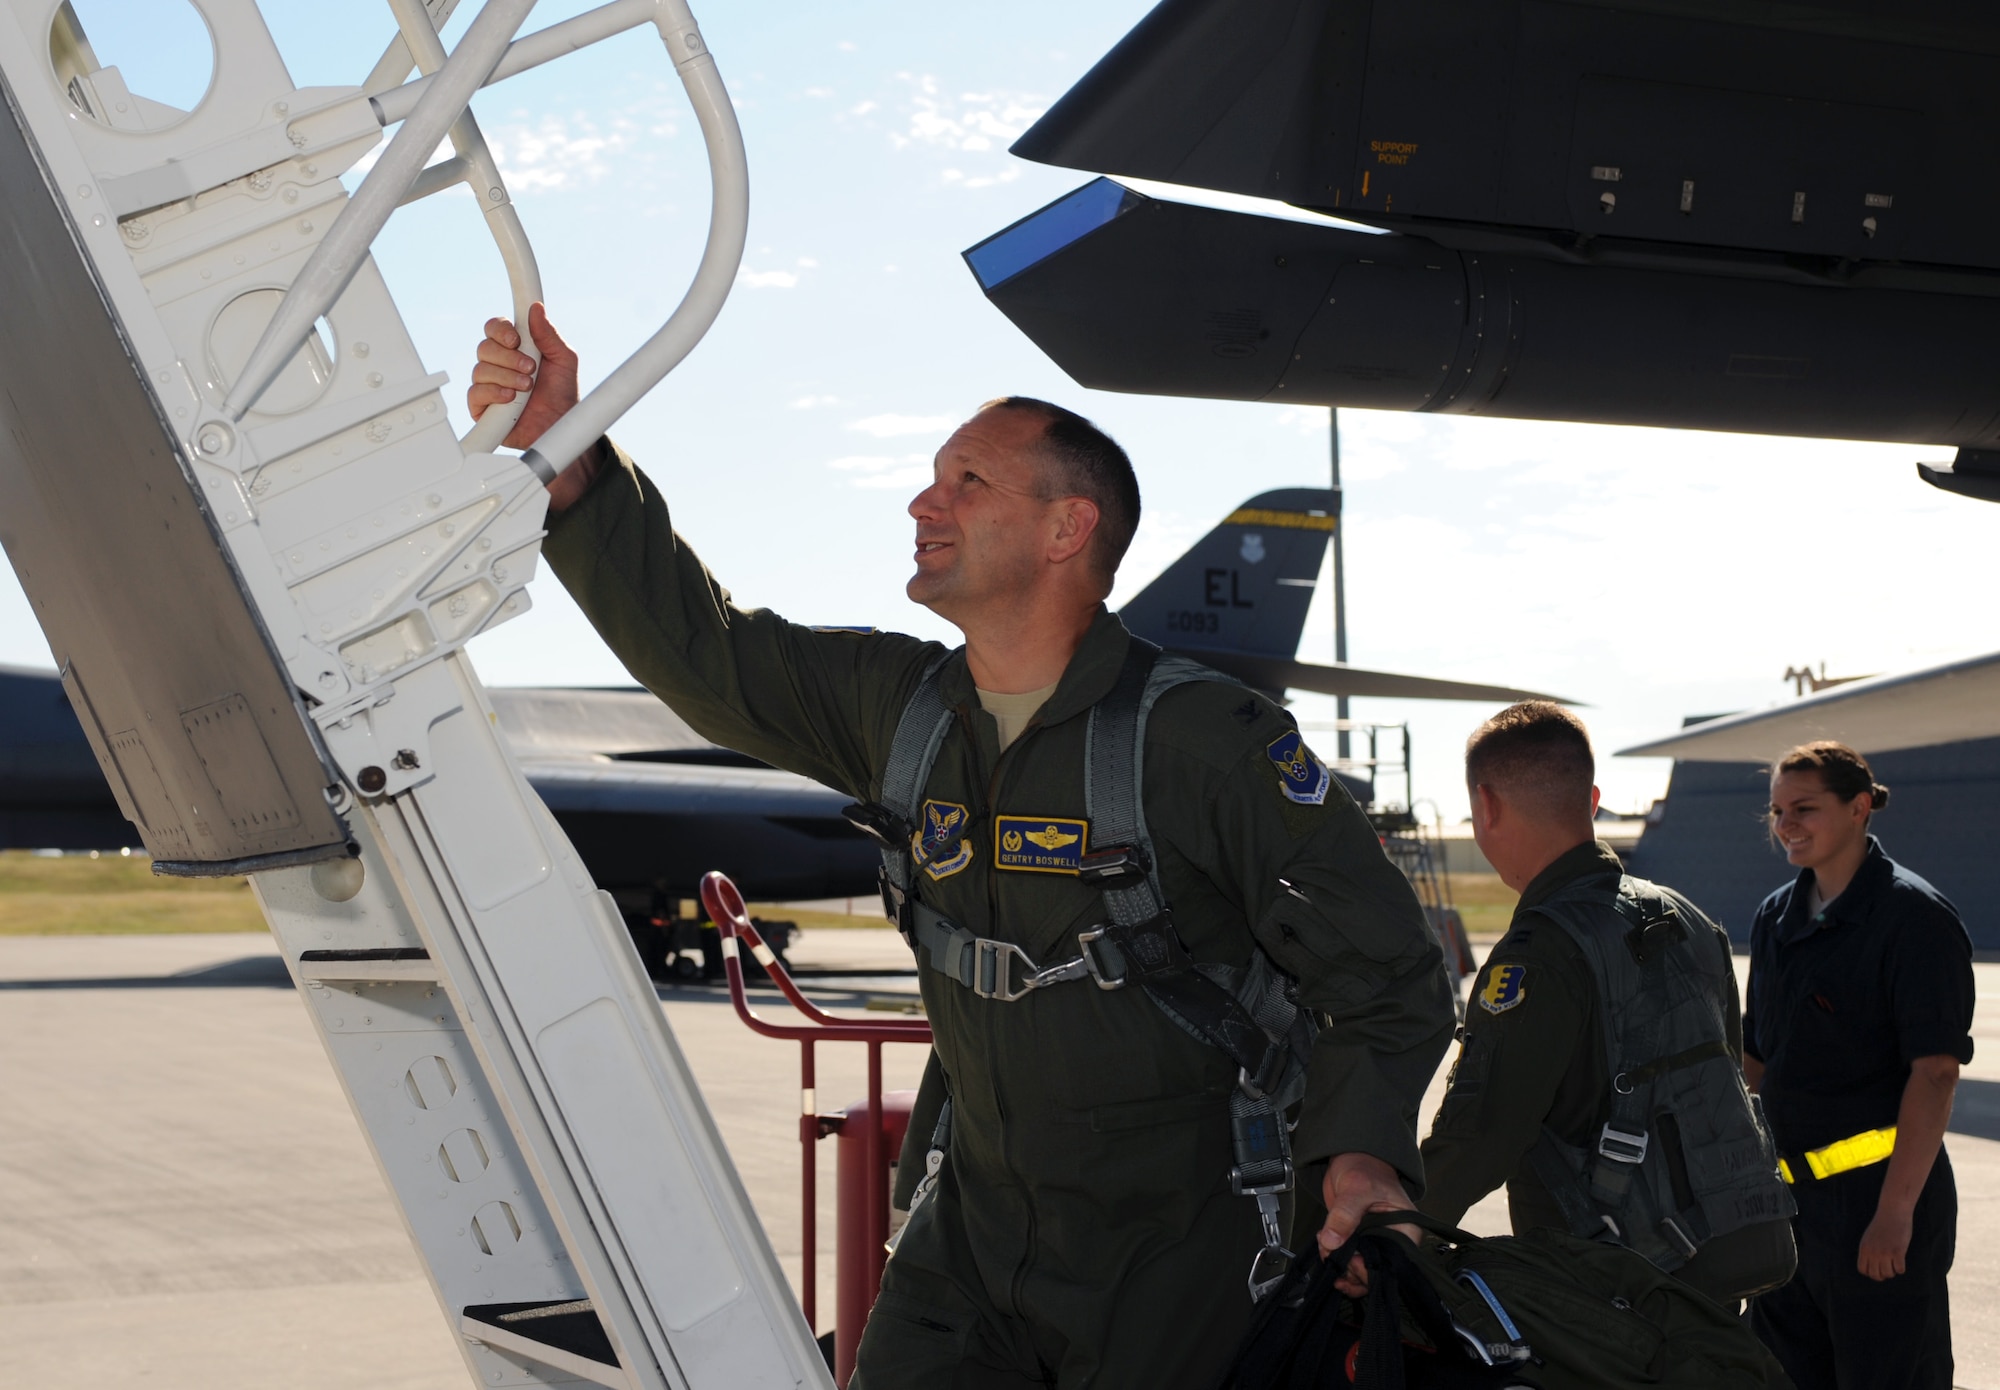 Col. Gentry Boswell, 28th Bomb Wing commander, boards a B-1 bomber to perform a flyover to honor the passing of U.S. Army Air Corps Staff Sgt. David Thatcher at Ellsworth Air Force Base, S.D., June 27, 2016. Thatcher was the engineer gunner of the original Ruptured Duck, one of 16 B-25 Mitchell bombers that launched off the deck of the aircraft carrier the U.S.S. Hornet and headed to the coast of Japan to wreak havoc on the Japanese empire April 18, 1942. (U.S. Air Force photo by Airman 1st Class Denise M. Nevins/Released)